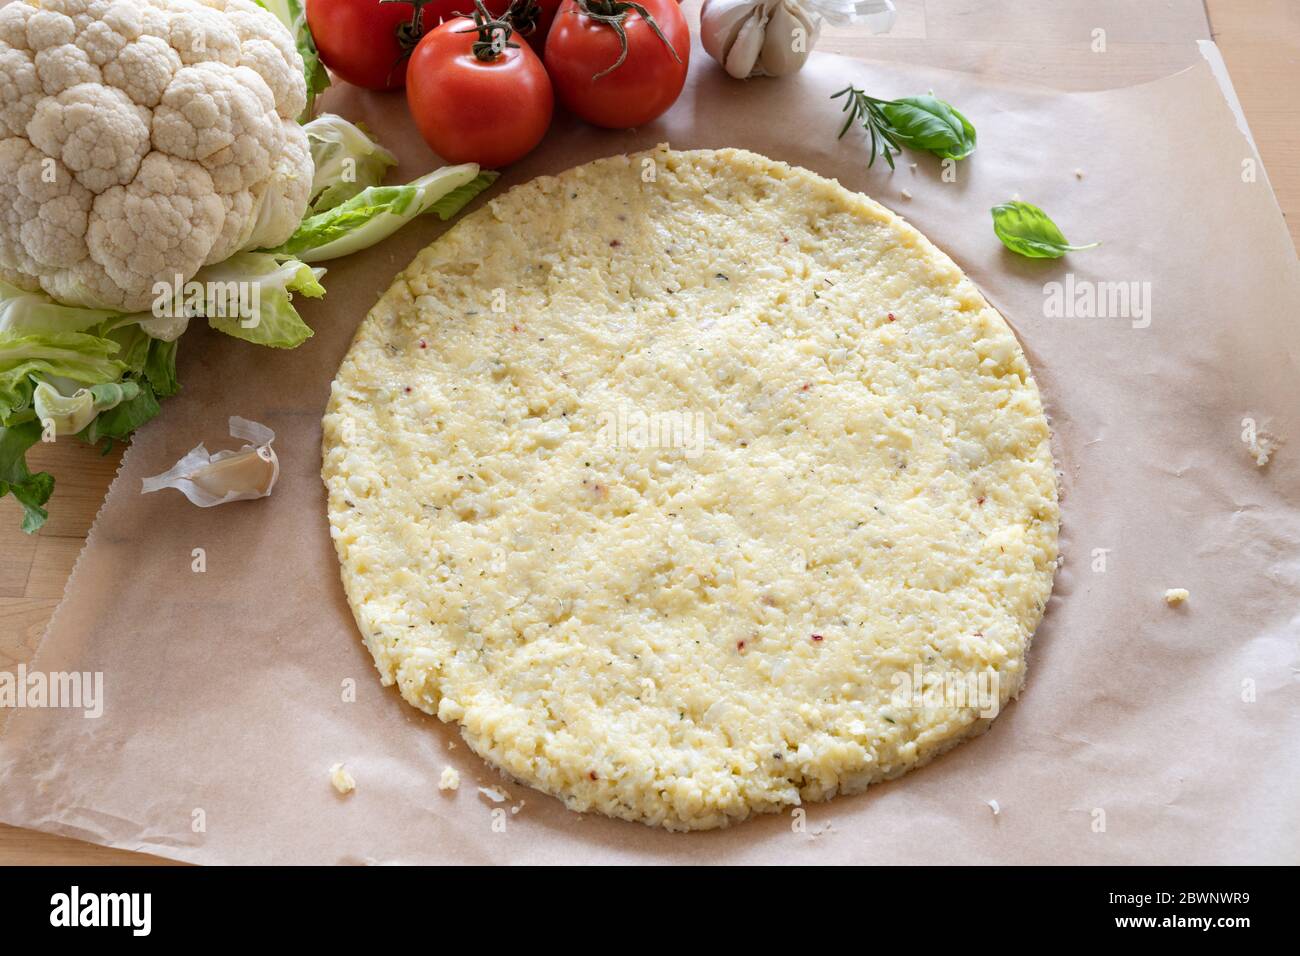 Vegetable pizza base from shredded cauliflower and cheese on baking paper, healthy alternative for low carb and ketogenic diet,  view from above, sele Stock Photo